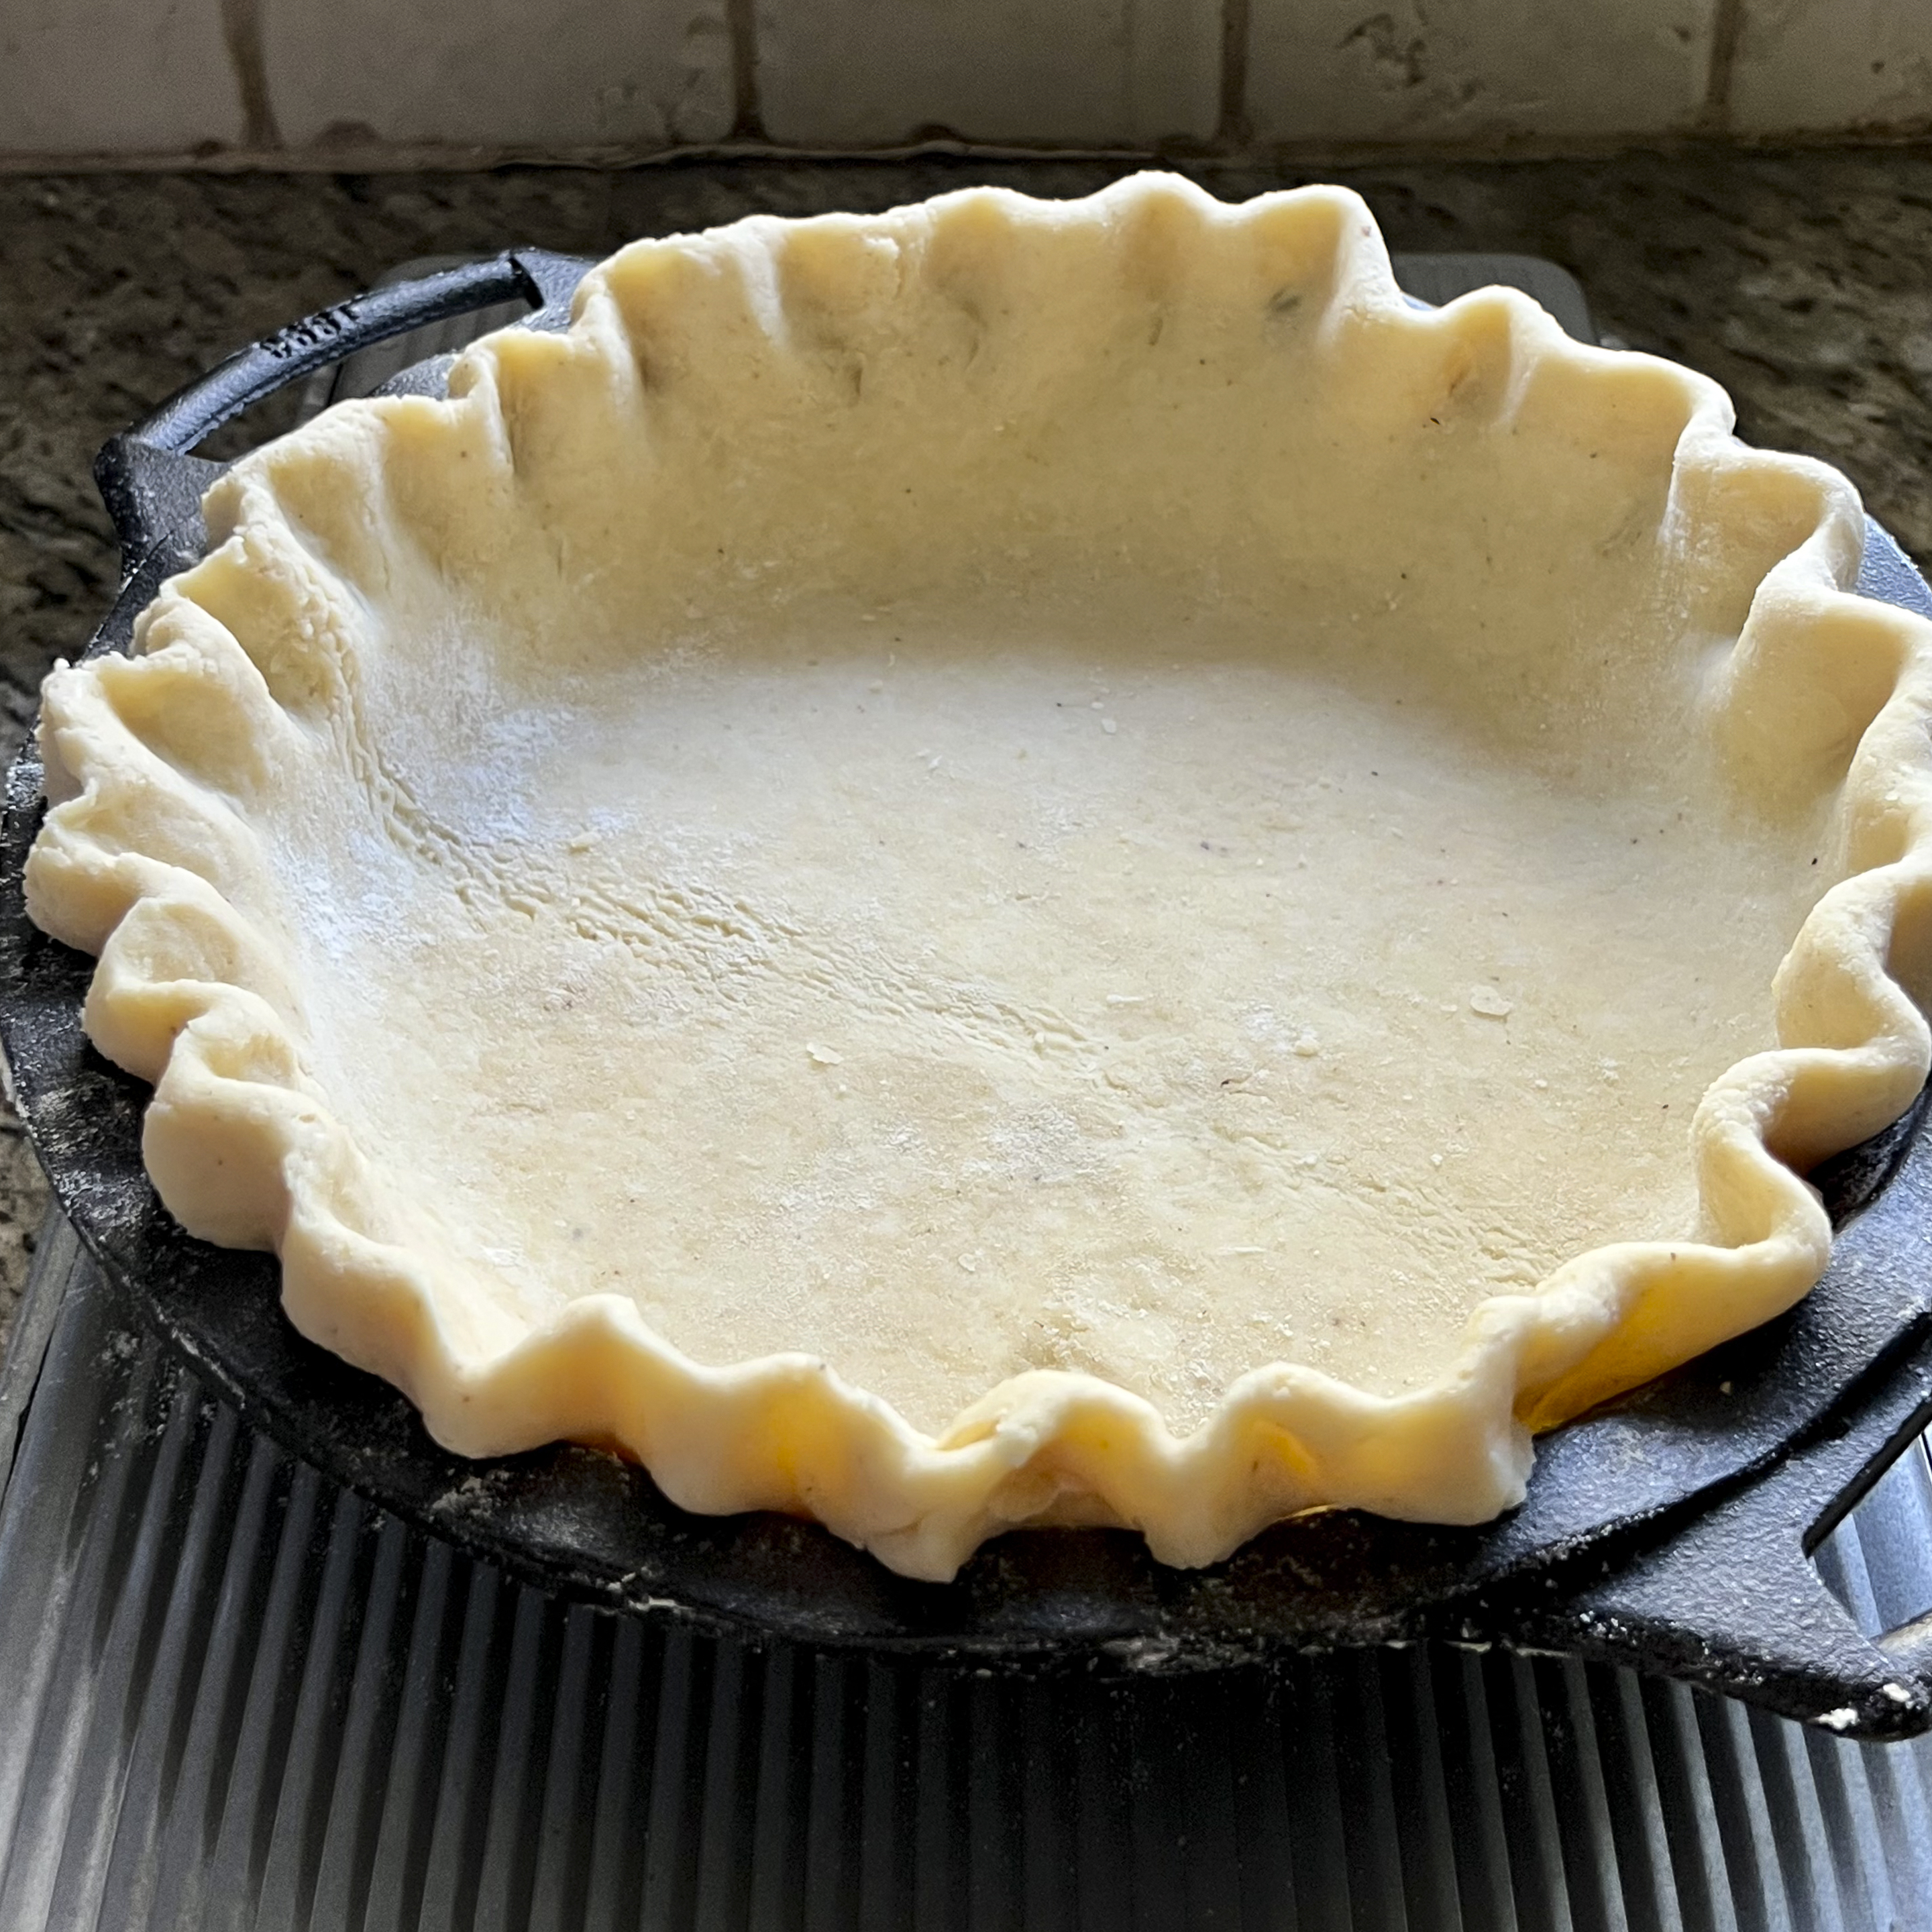 An unbaked pie crust is in a cast iron pie pan.